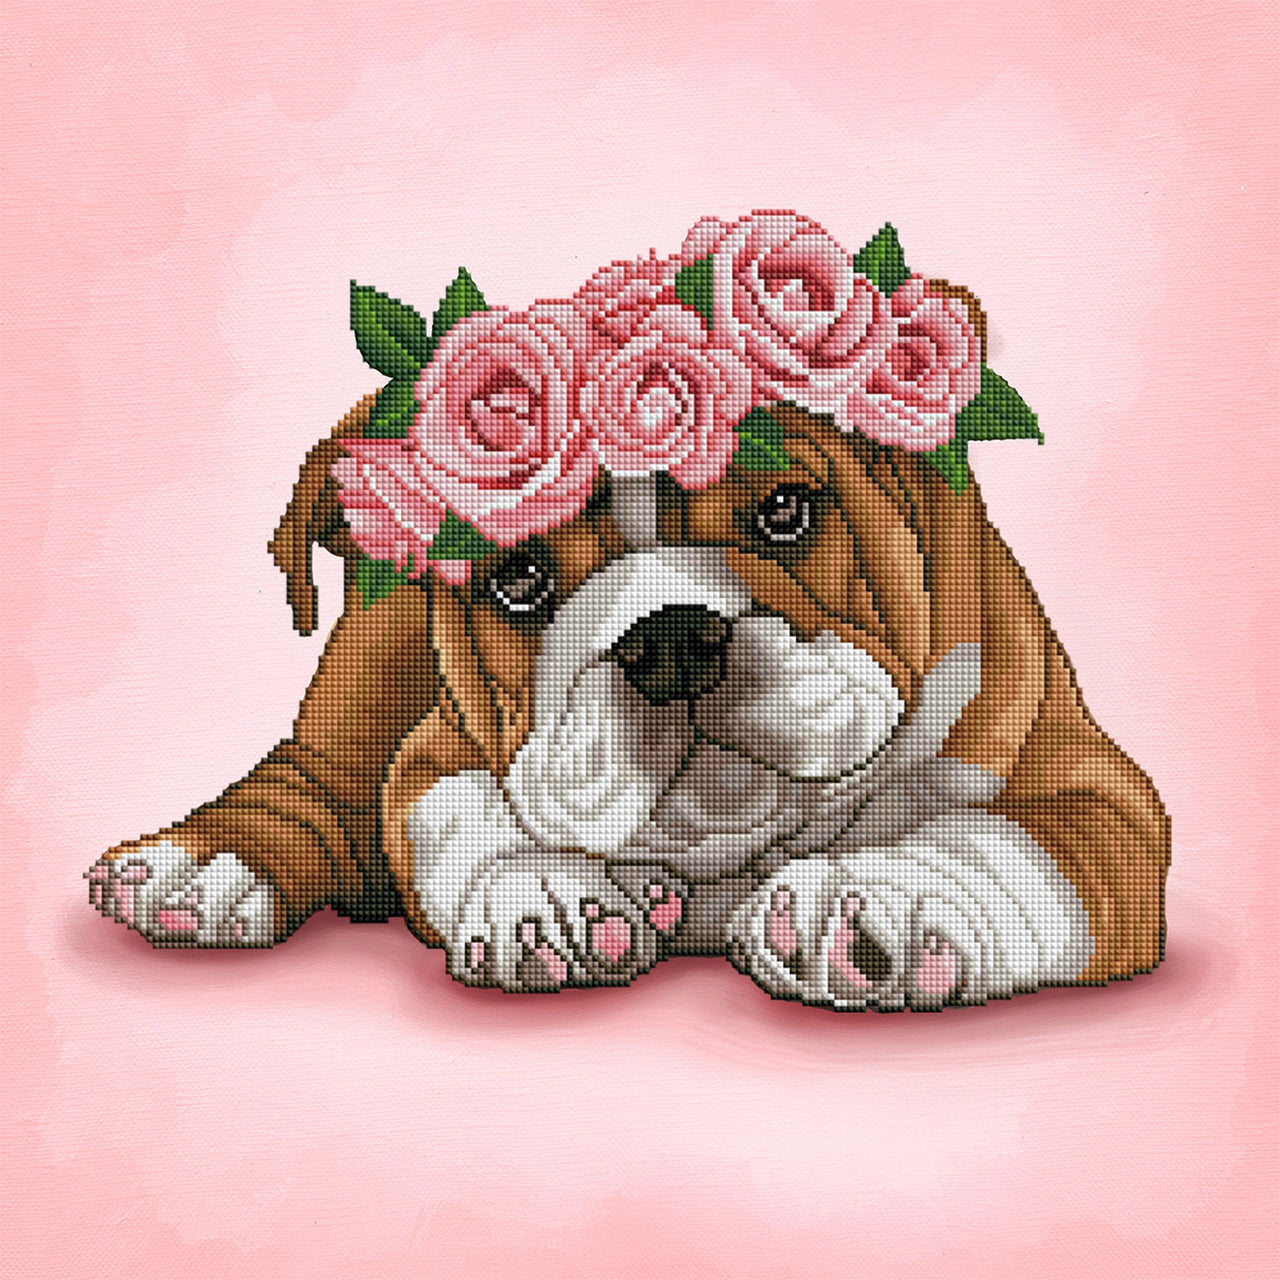 Diamond Painting Bulldog & Roses 20" x 20" (51cm x 51cm) / Square with 30 Colors including 4 ABs / 13,911